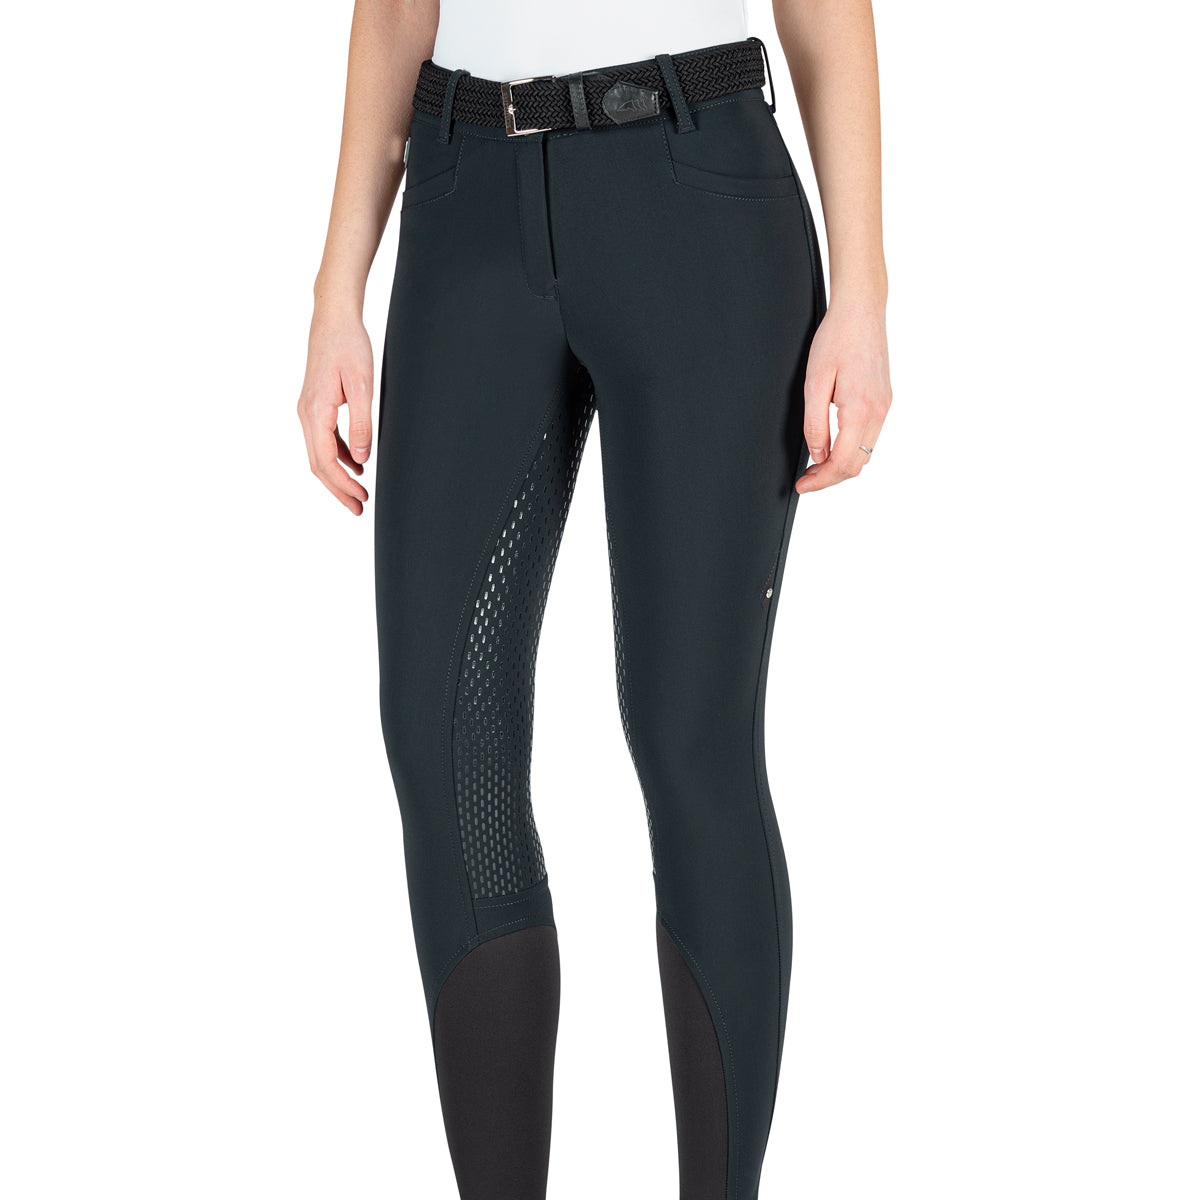 The Equiline Adellek Full Grip Navy Breeches are made from the new B-Move Fabric, offering breathability and durability. The silicone full seat provides stability in the saddle, and finished with a high waistband.